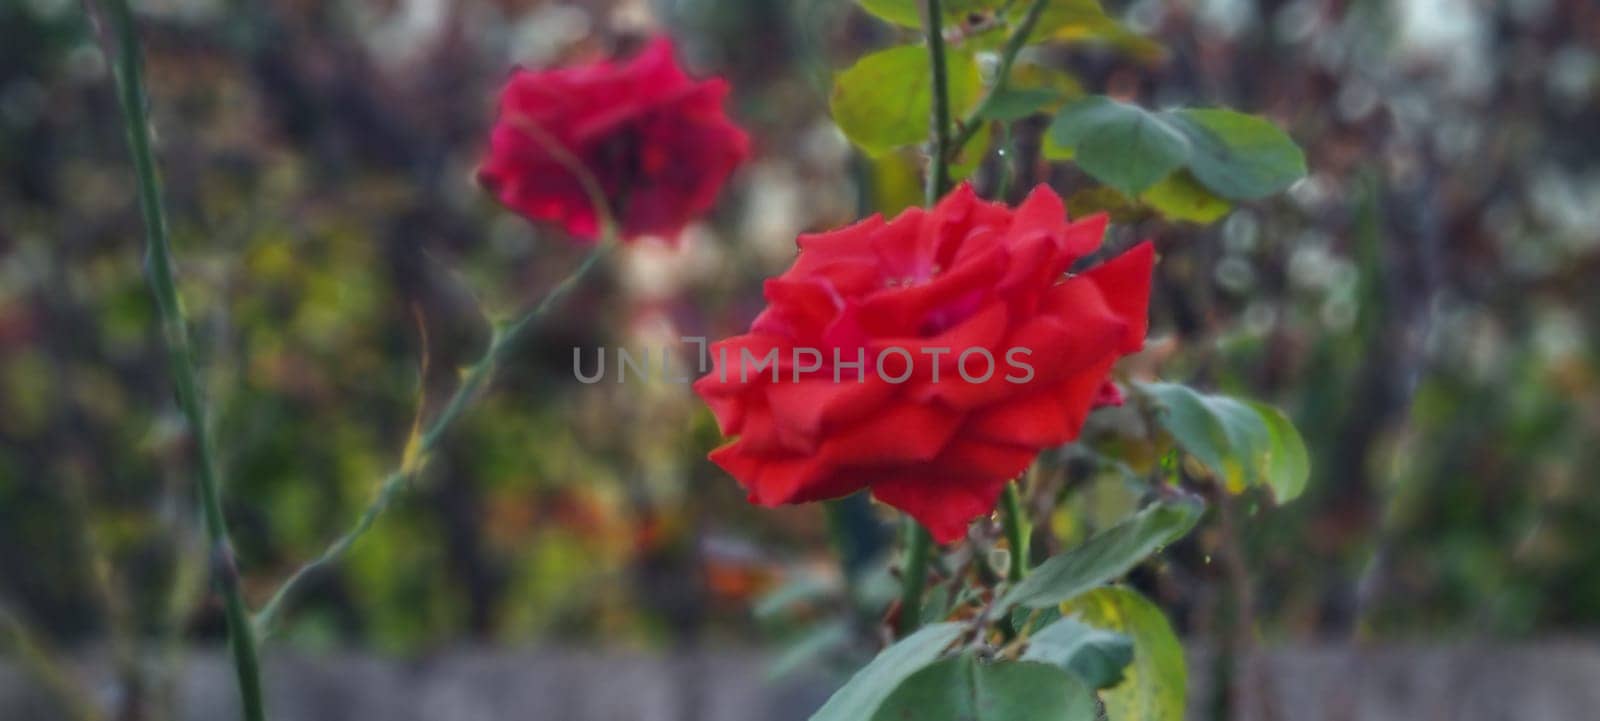 Vibrant red roses in garden setting by FlightVideo